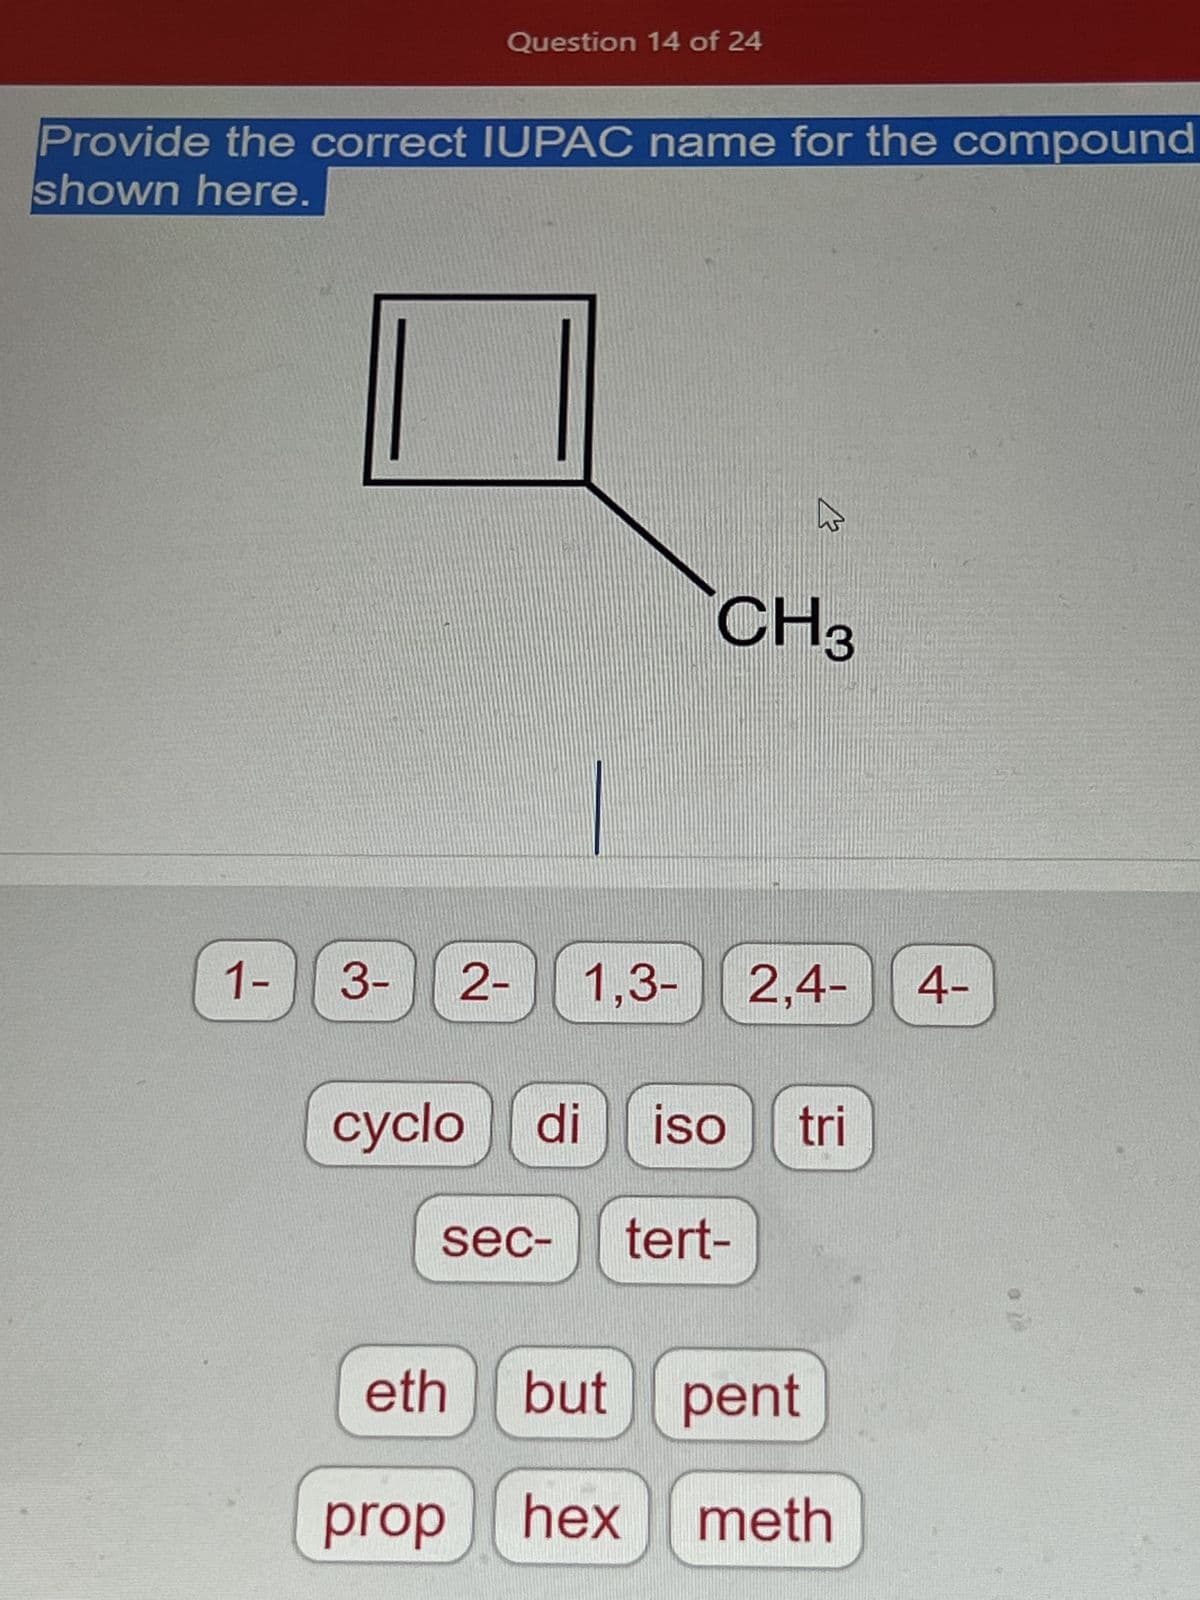 Provide the correct IUPAC name for the compound
shown here.
1-
Question 14 of 24
K
eth
CH3
3- 2- 1,3-2,4- 4-
cyclo di ISO tri
sec tert-
but pent
prop hex meth